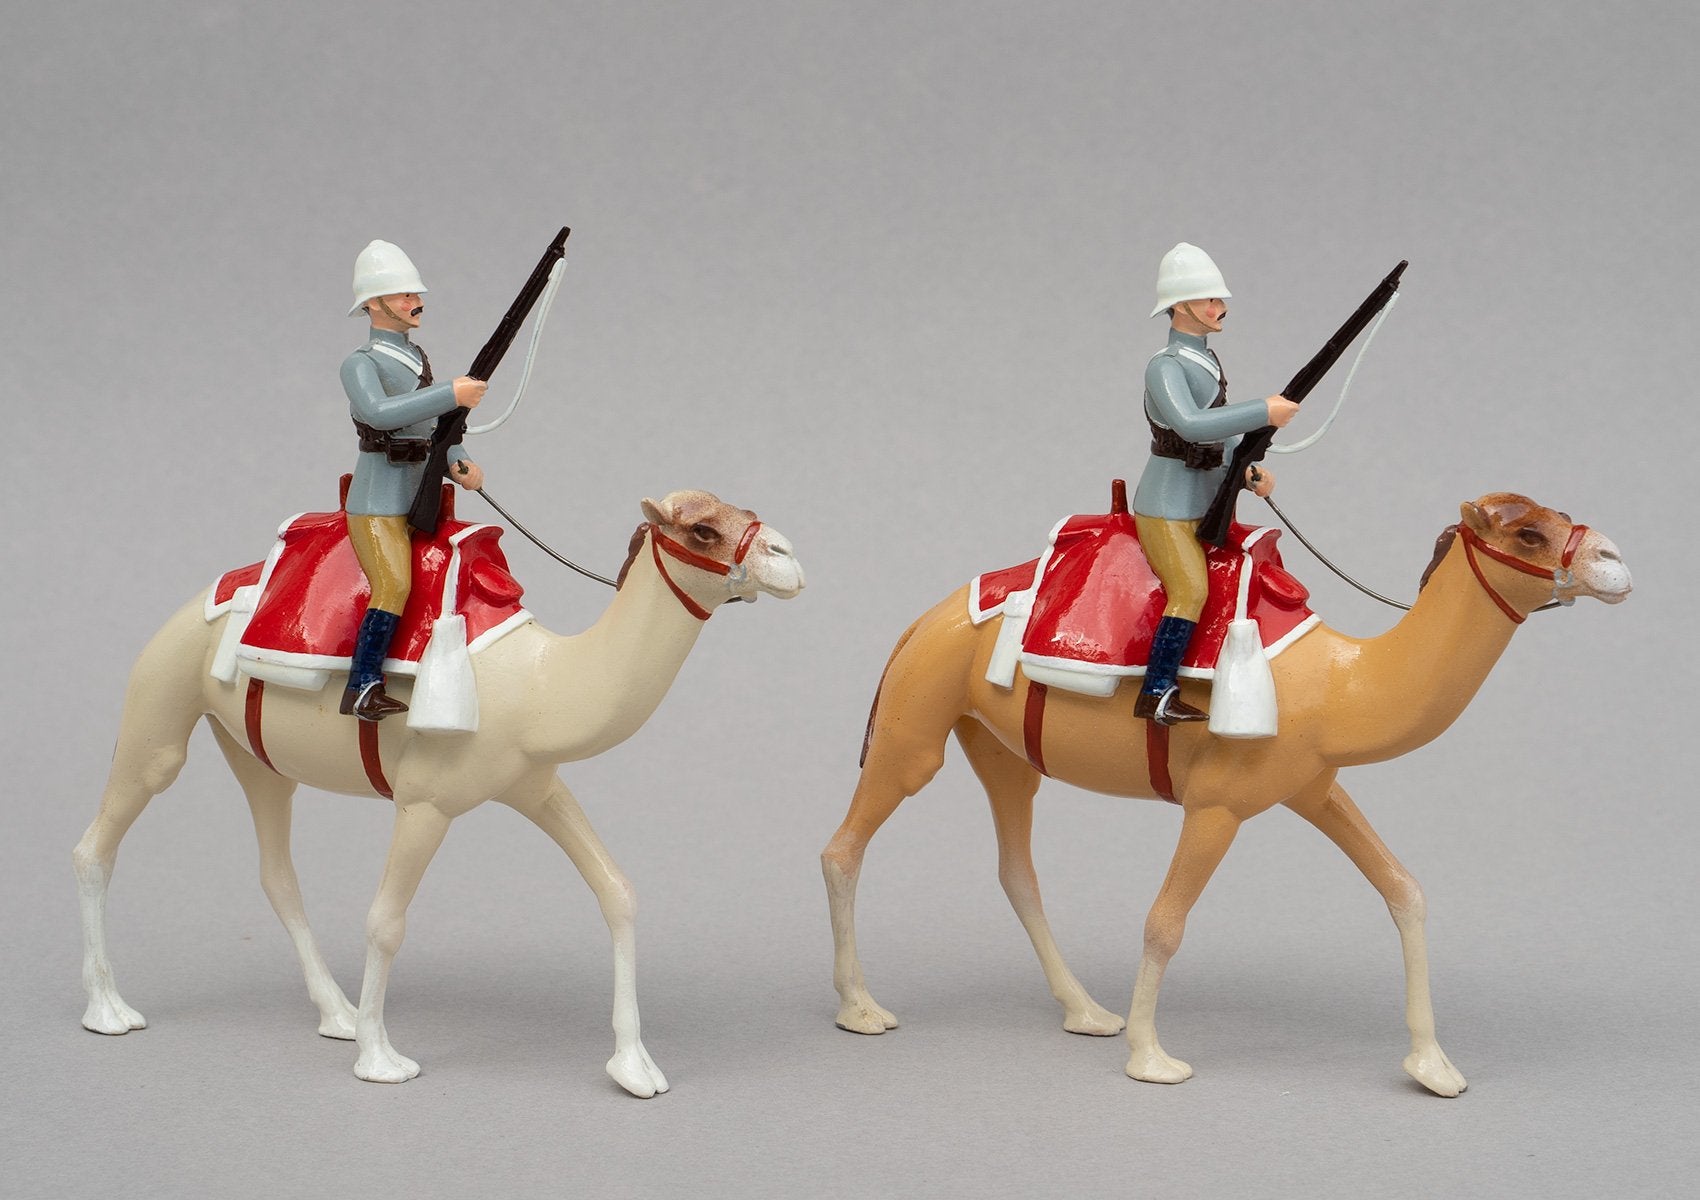 Set 126 Guards Camel Regiment, 1885 | British Cavalry | Sudan War | Guards Camel Regiment. Two mounted cavalry on camels, grey jackets | Omdurman, Relief of Gordon, Nile River | © Imperial Productions | Sculpt by David Cowe